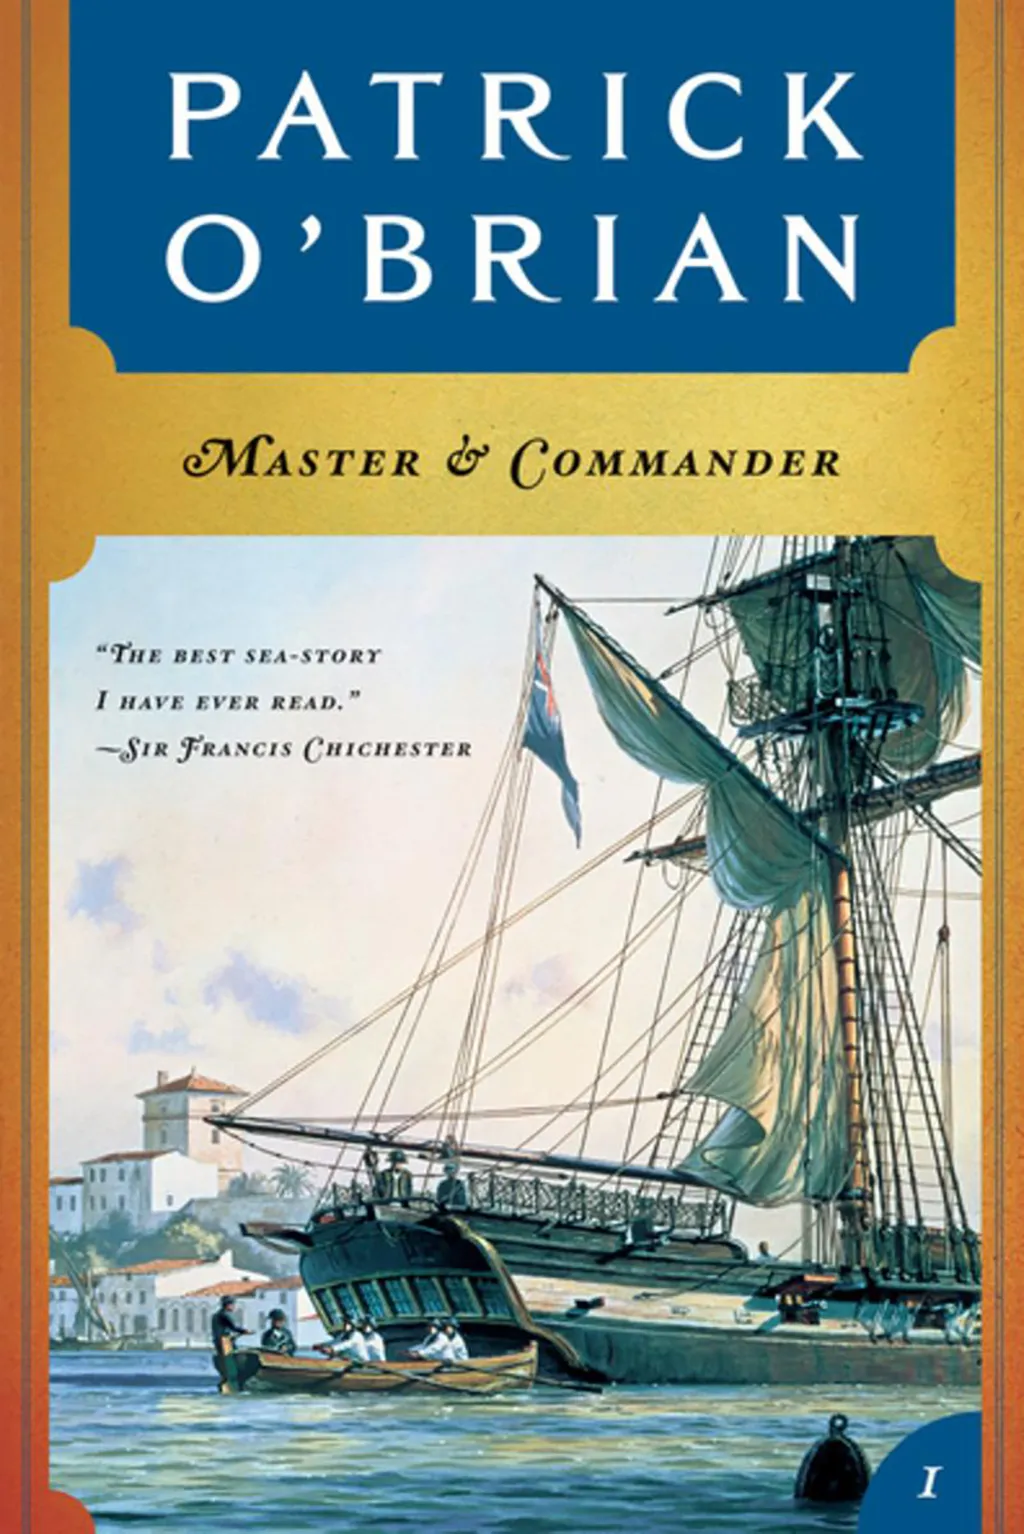 master and commander, books every man should read